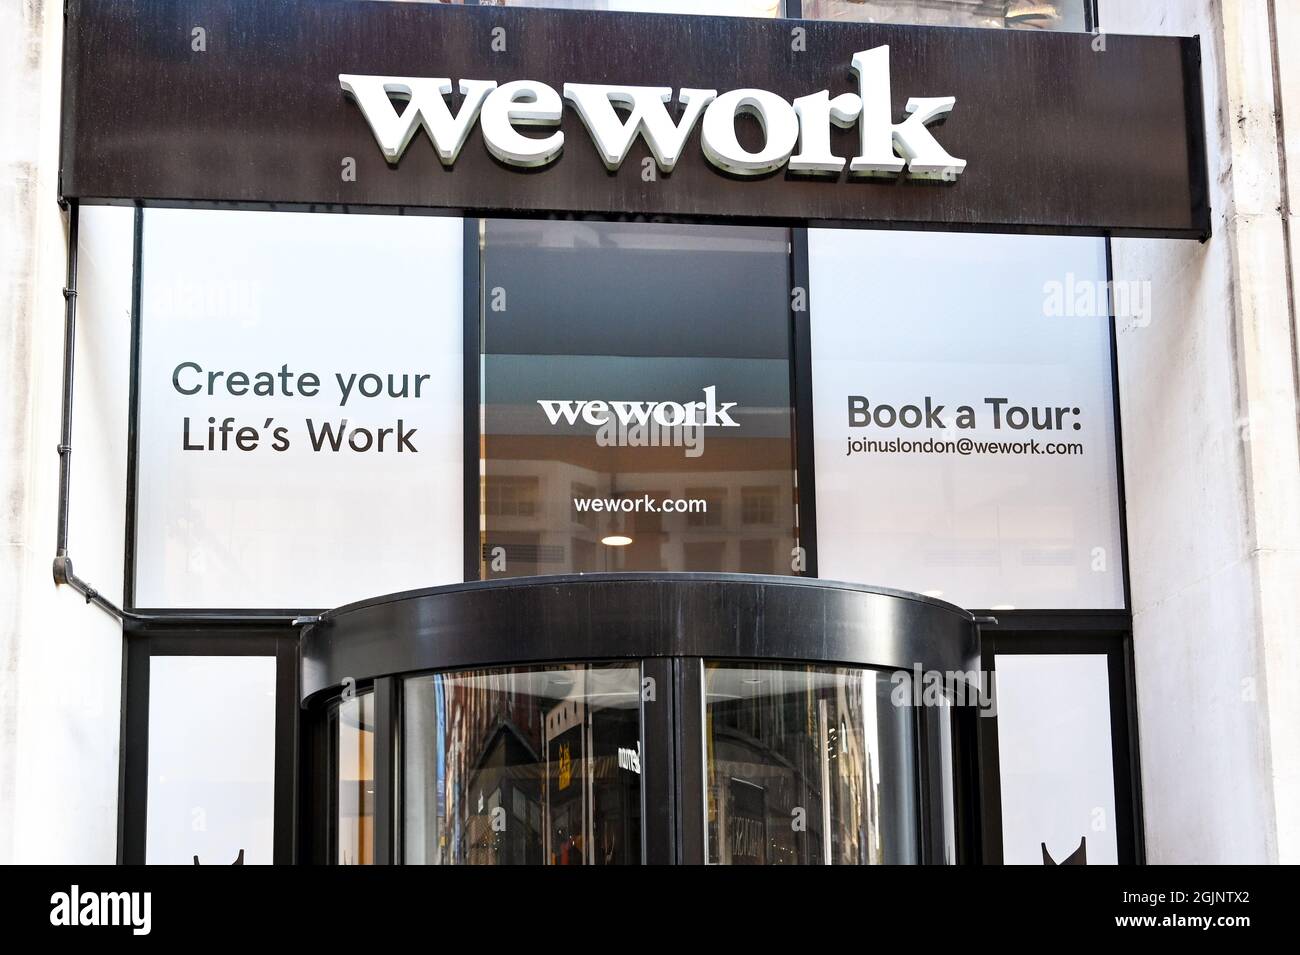 London, England - August 2021: Sign above the entrance to a branch of the We Work office space and co-working company Stock Photo